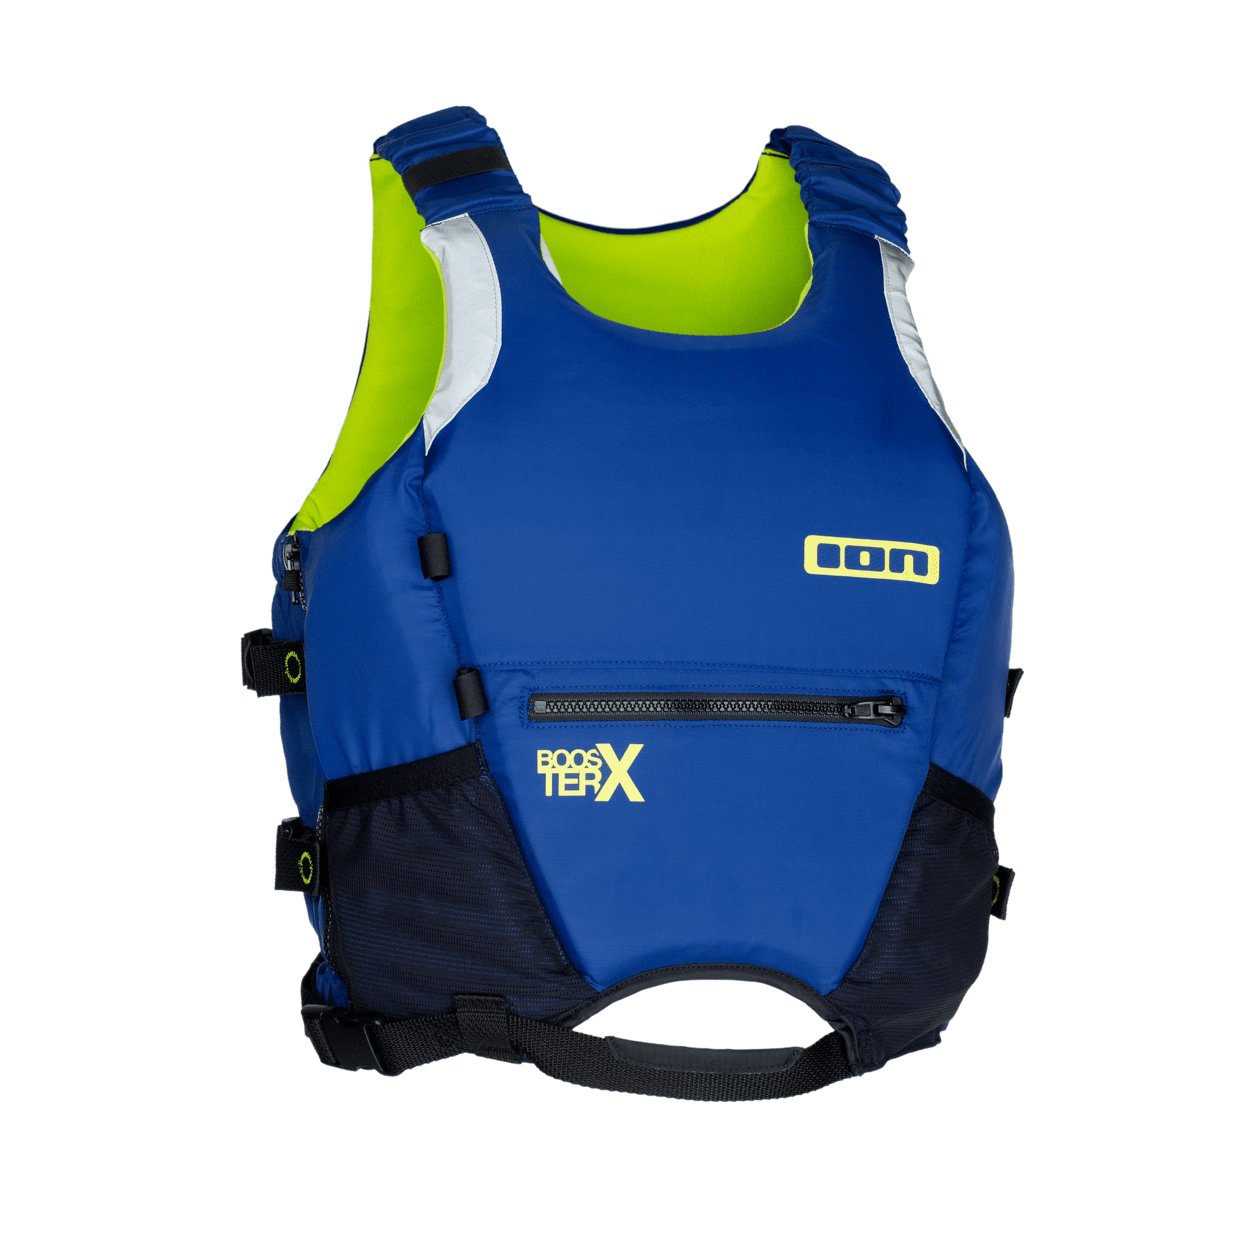 ION Booster X Vest Side Zip 2022 - Worthing Watersports - 9008415982622 - Protection - ION Water